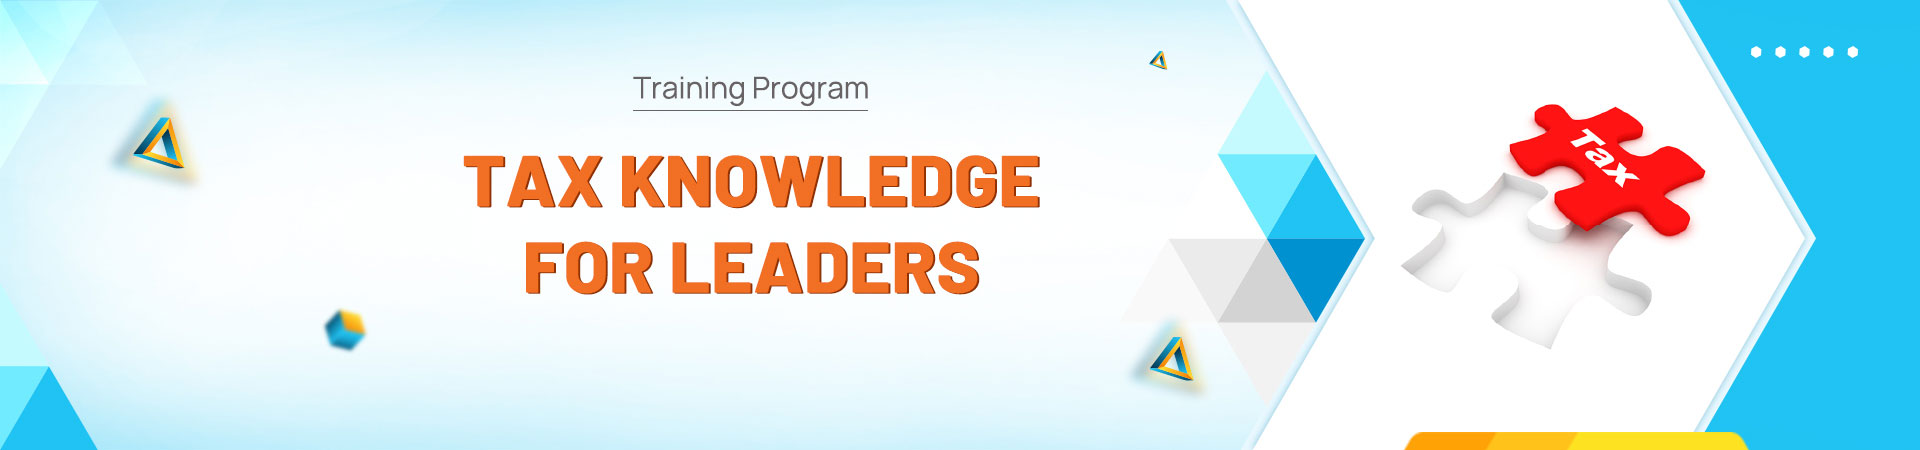 Tax Knowledge For Leaders